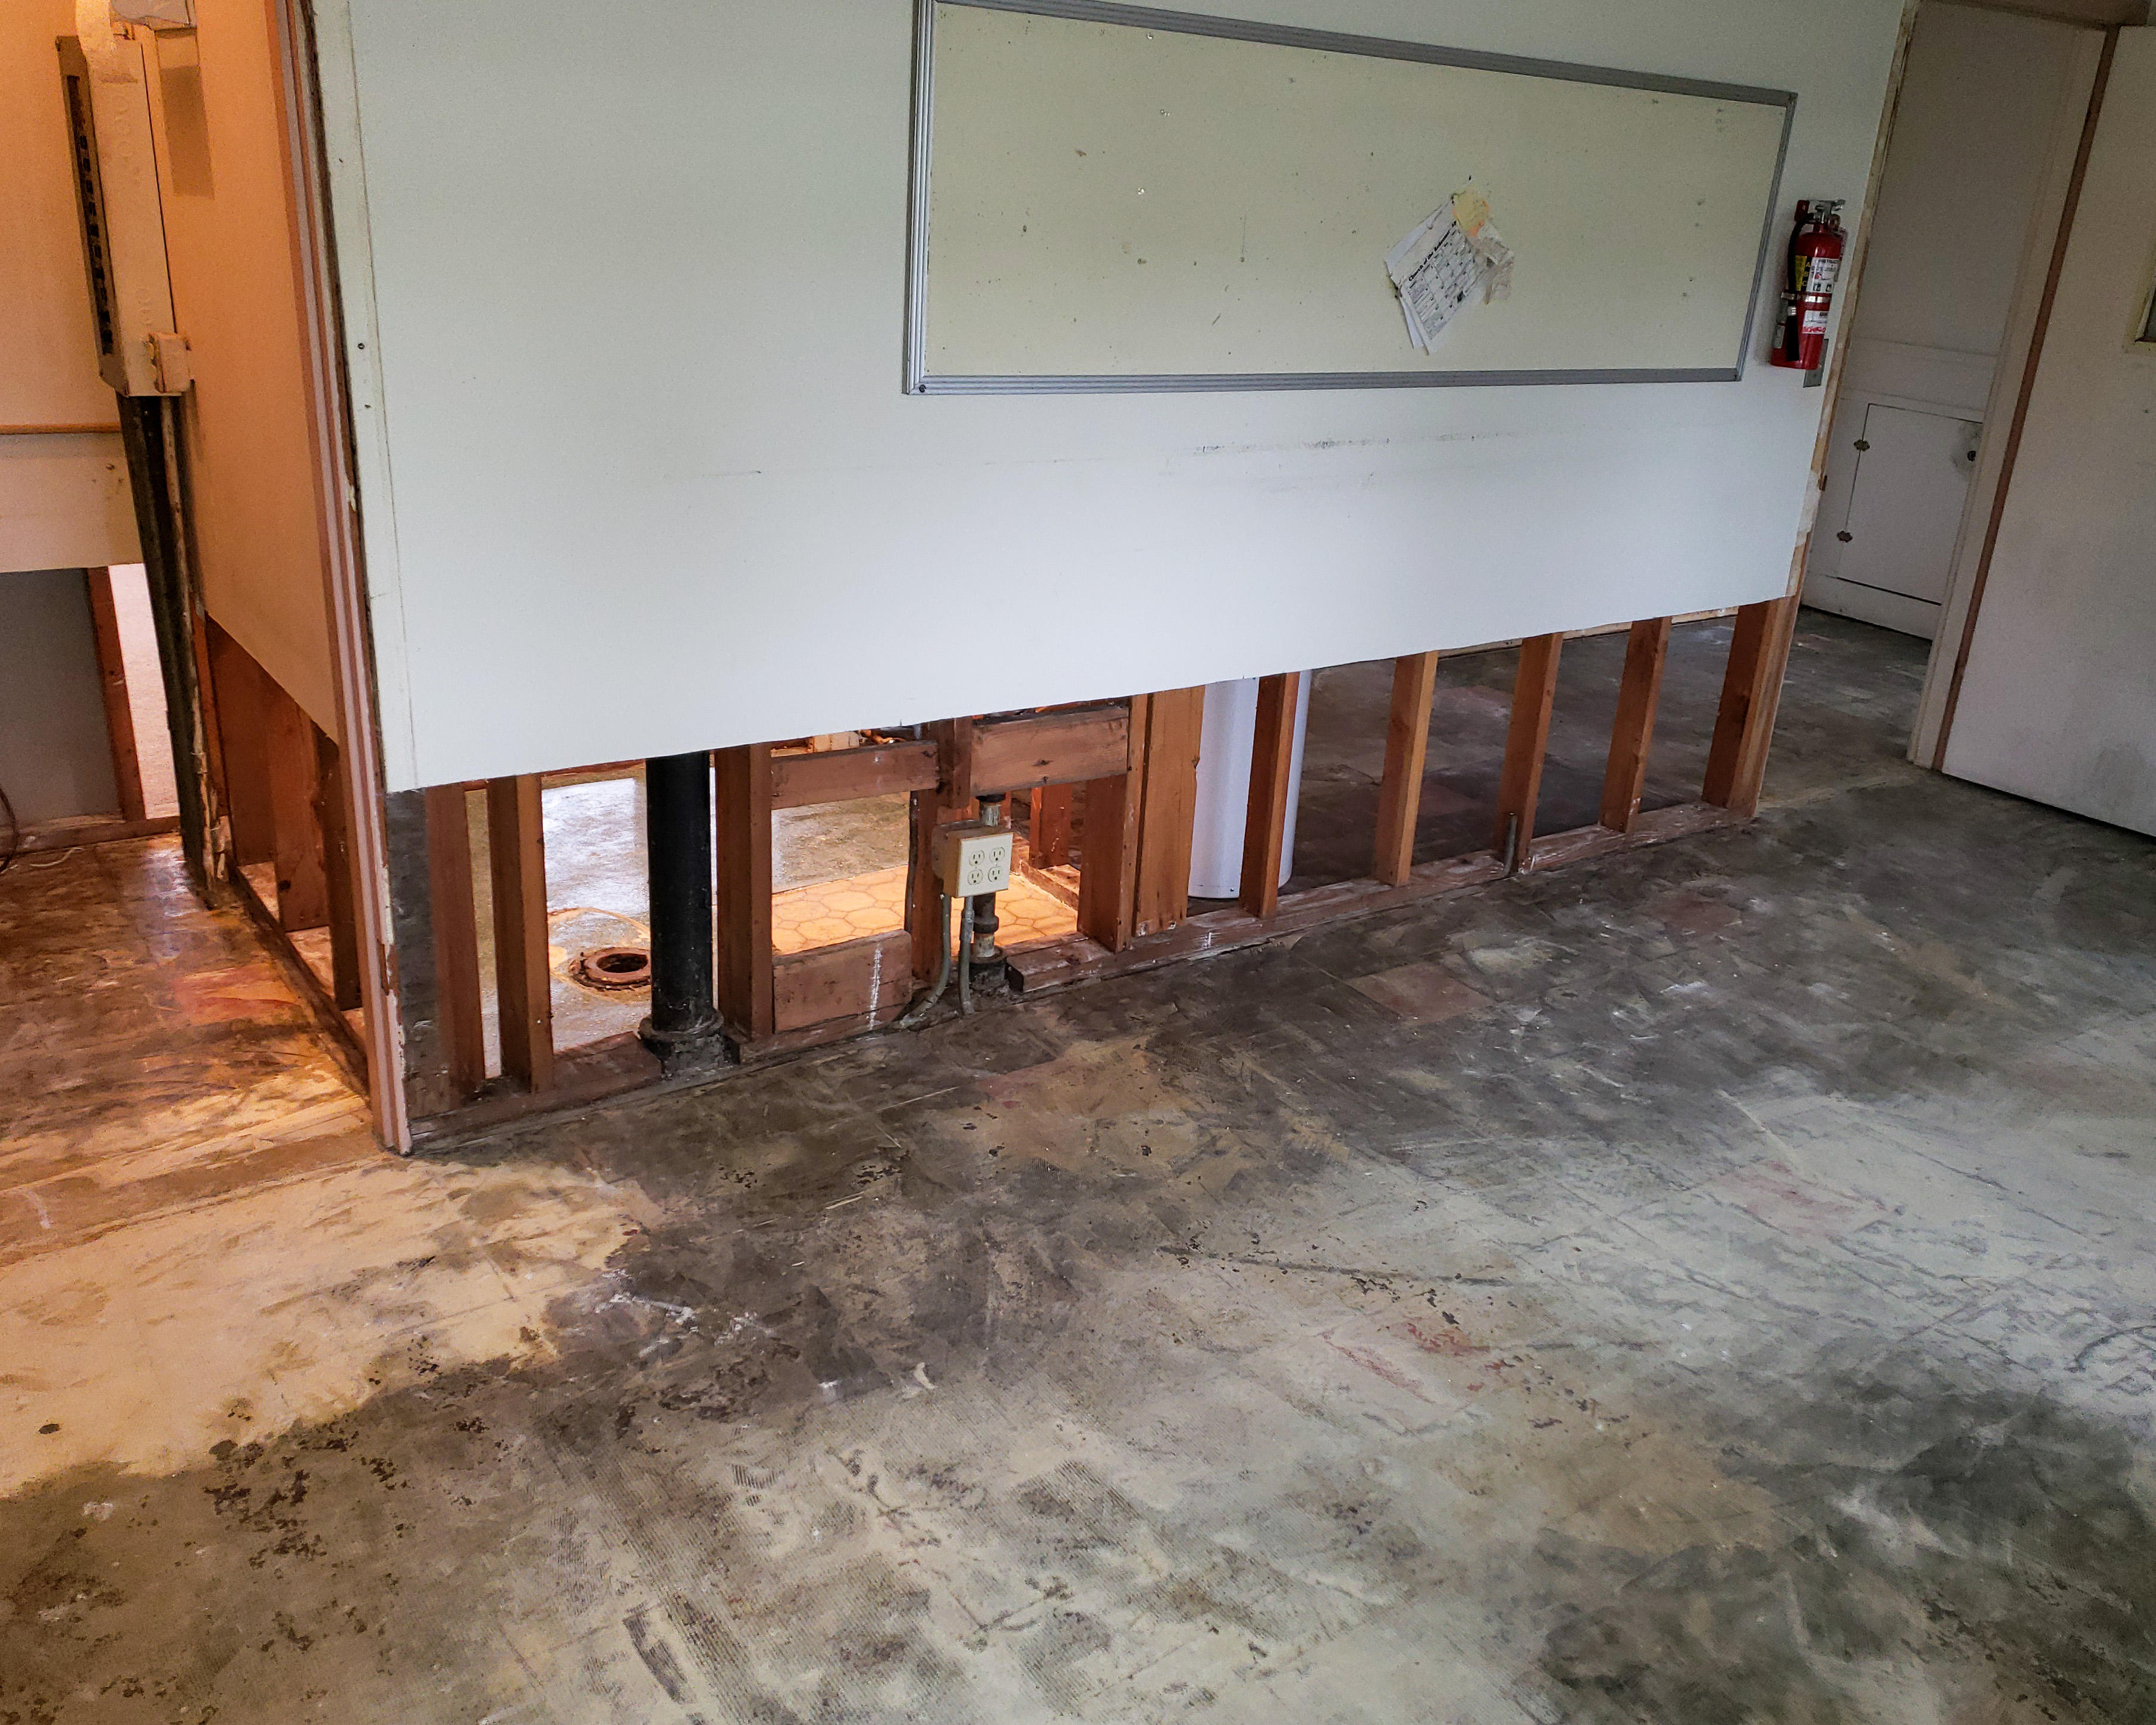 When you need a restoration or cleaning professional for your Woodinville, WA commercial property, SERVPRO of Shoreline/Woodinville is ready to respond immediately and work quickly to clean or restore your business.